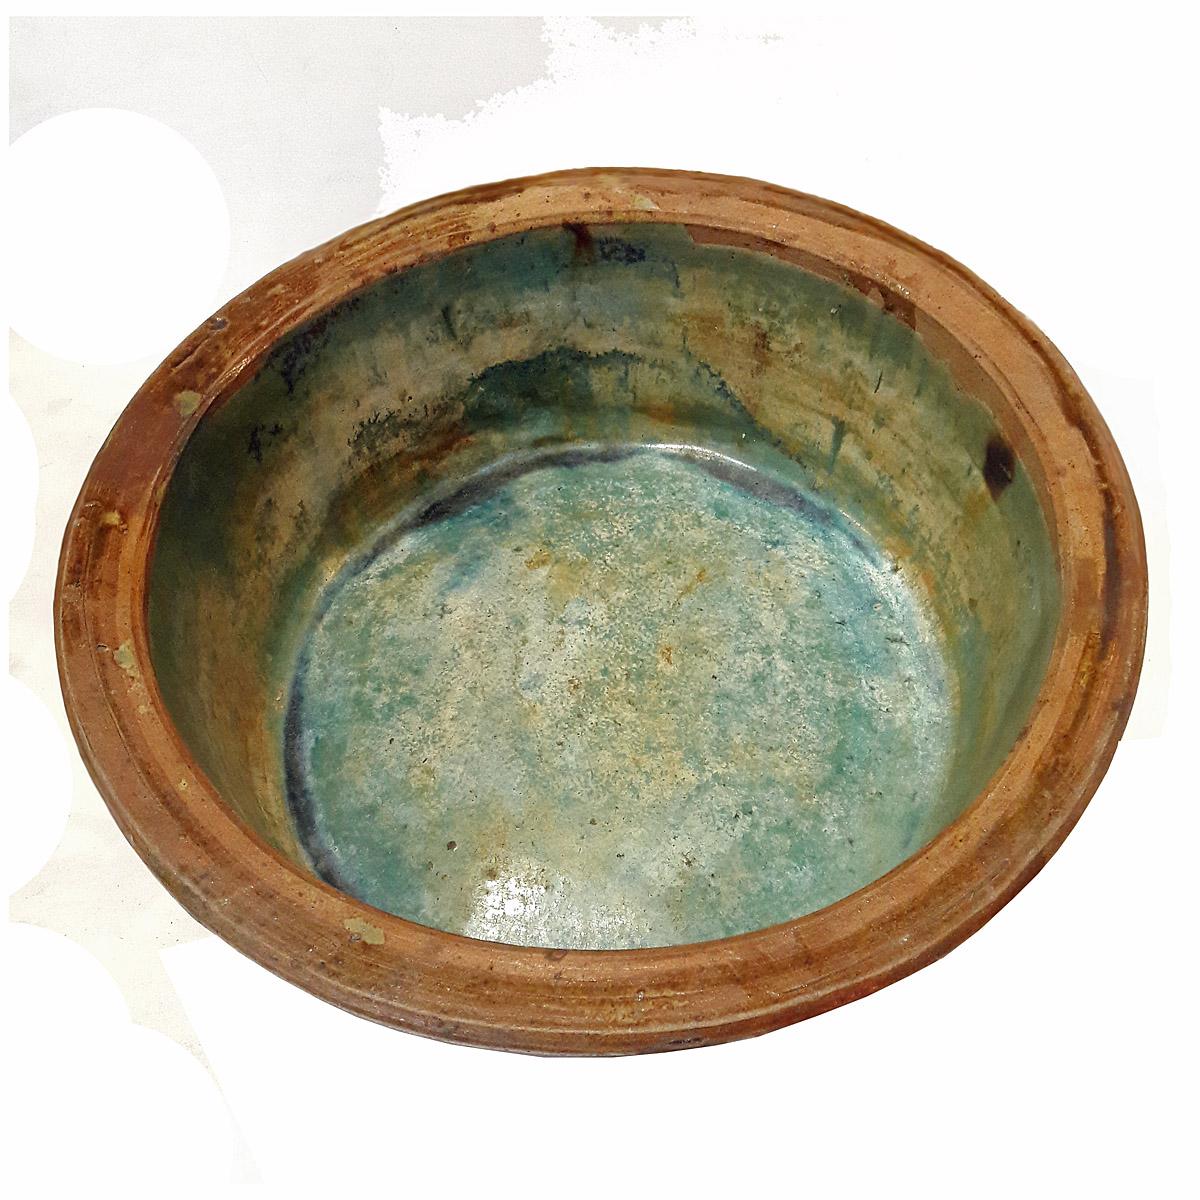 A tall and large ceramic bowl from Indonesia with brown ridged exterior and a green glazed interior, circa 1960.